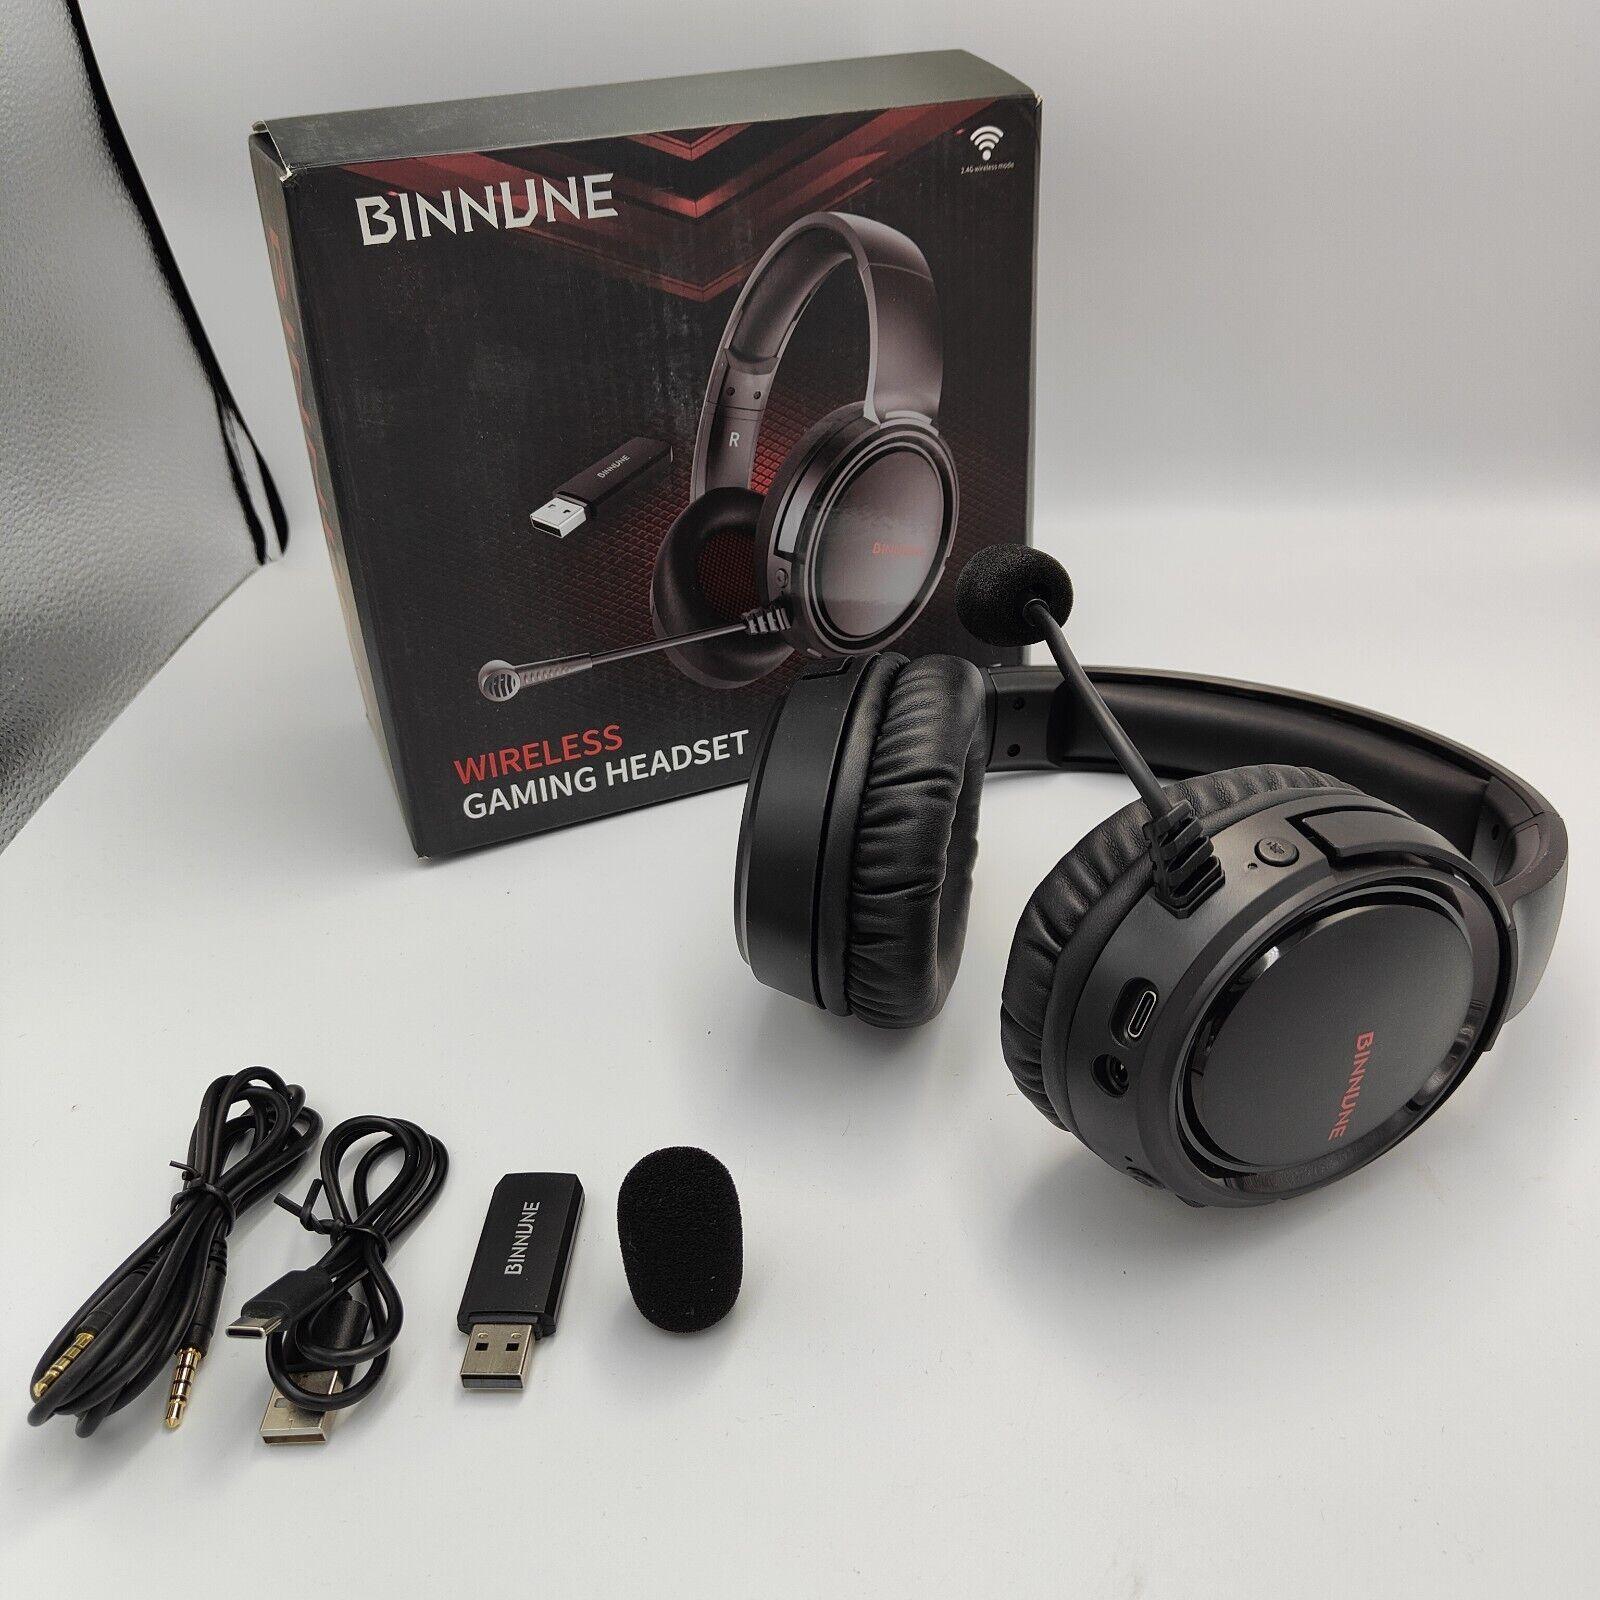 BINNUNE Wireless Gaming Headset with Mic for PC PS4 PS5 Used - Massive Discounts